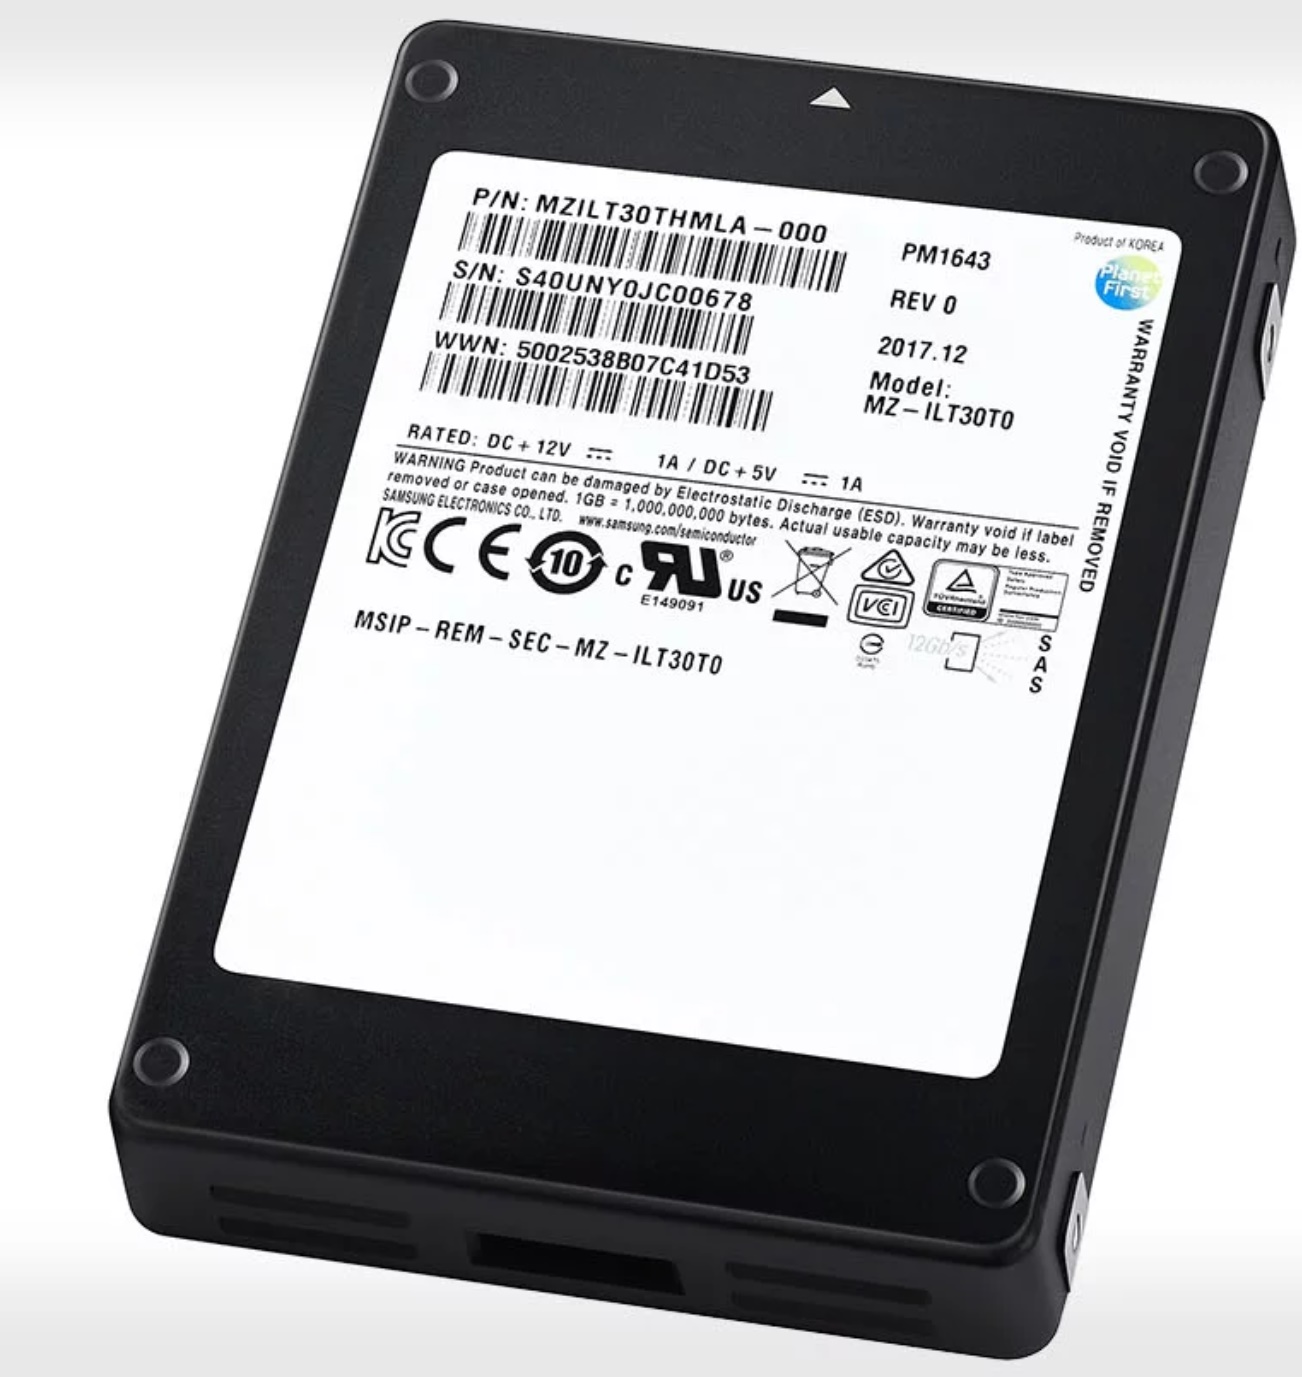 Samsung’s new 30TB SSD: Should it target Windows 10 PC and Apple Mac users?